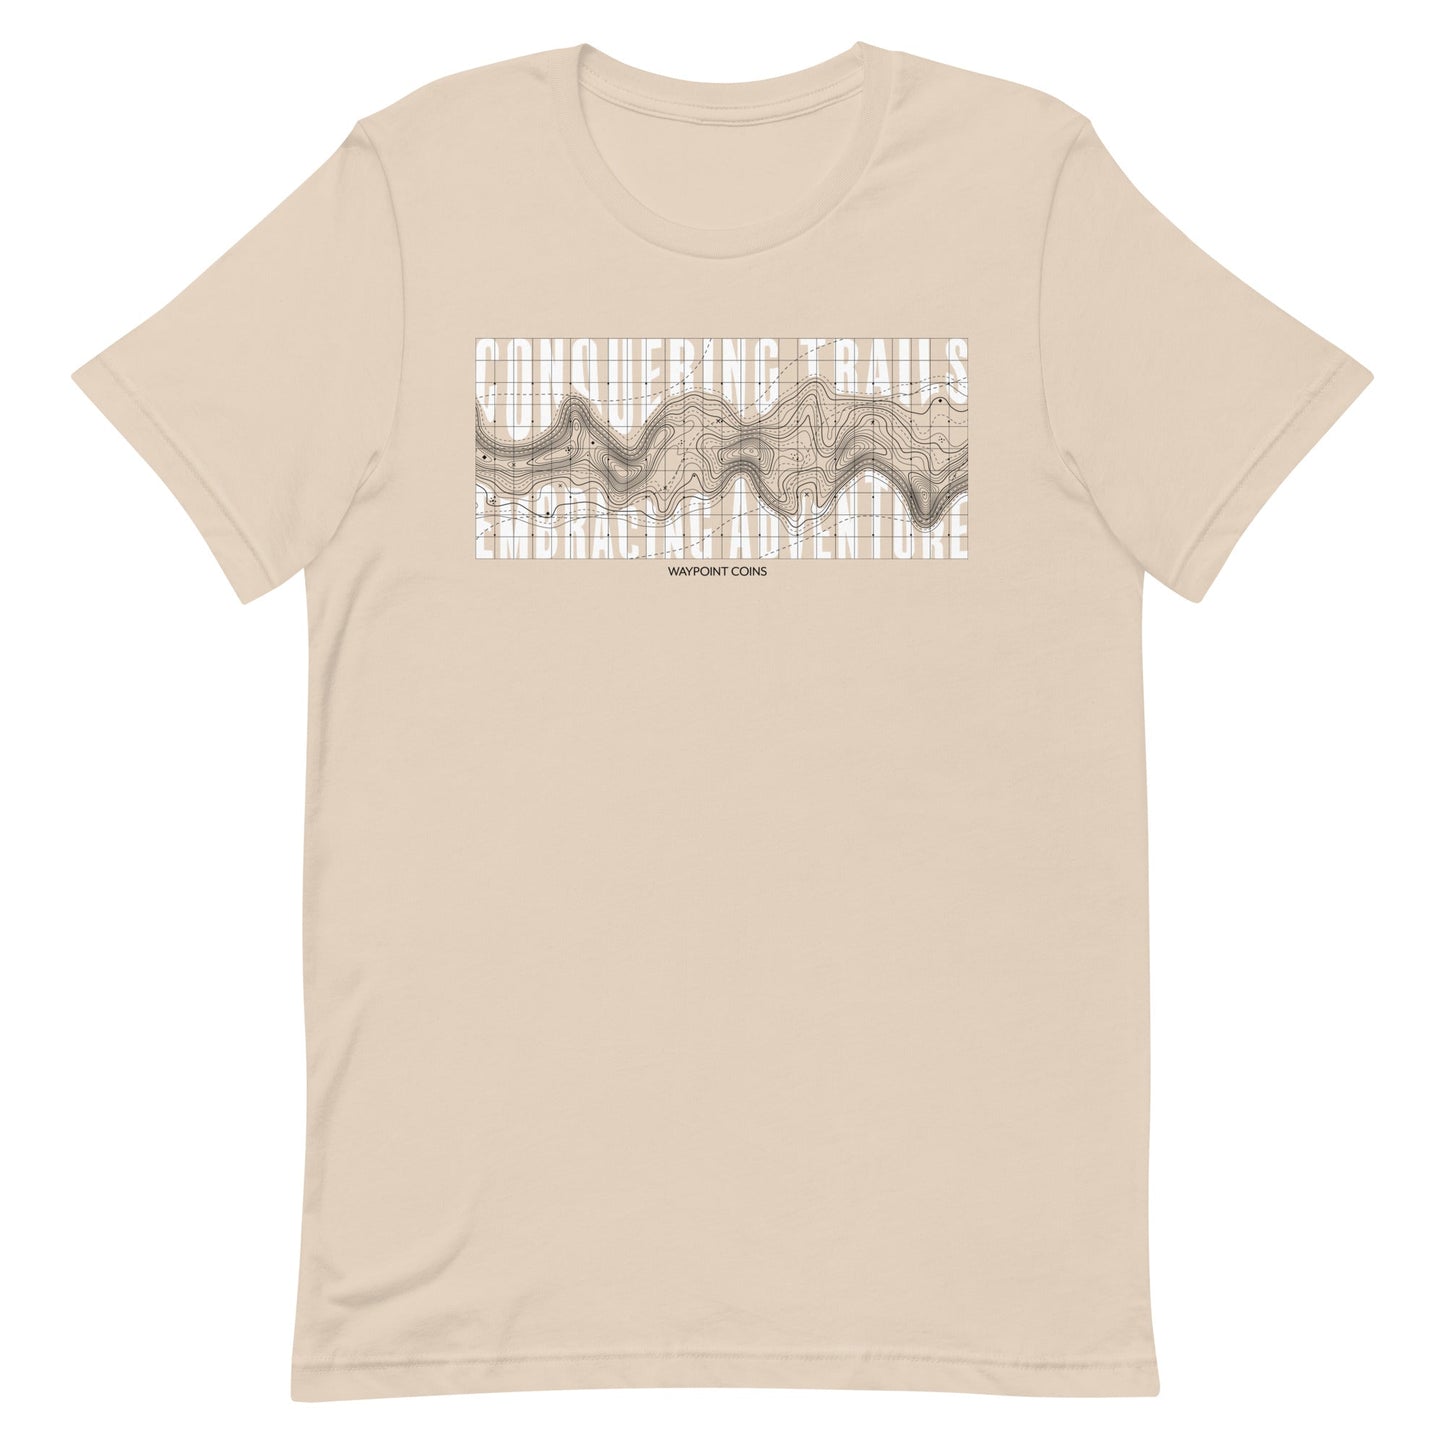 Conquering Trails Tee